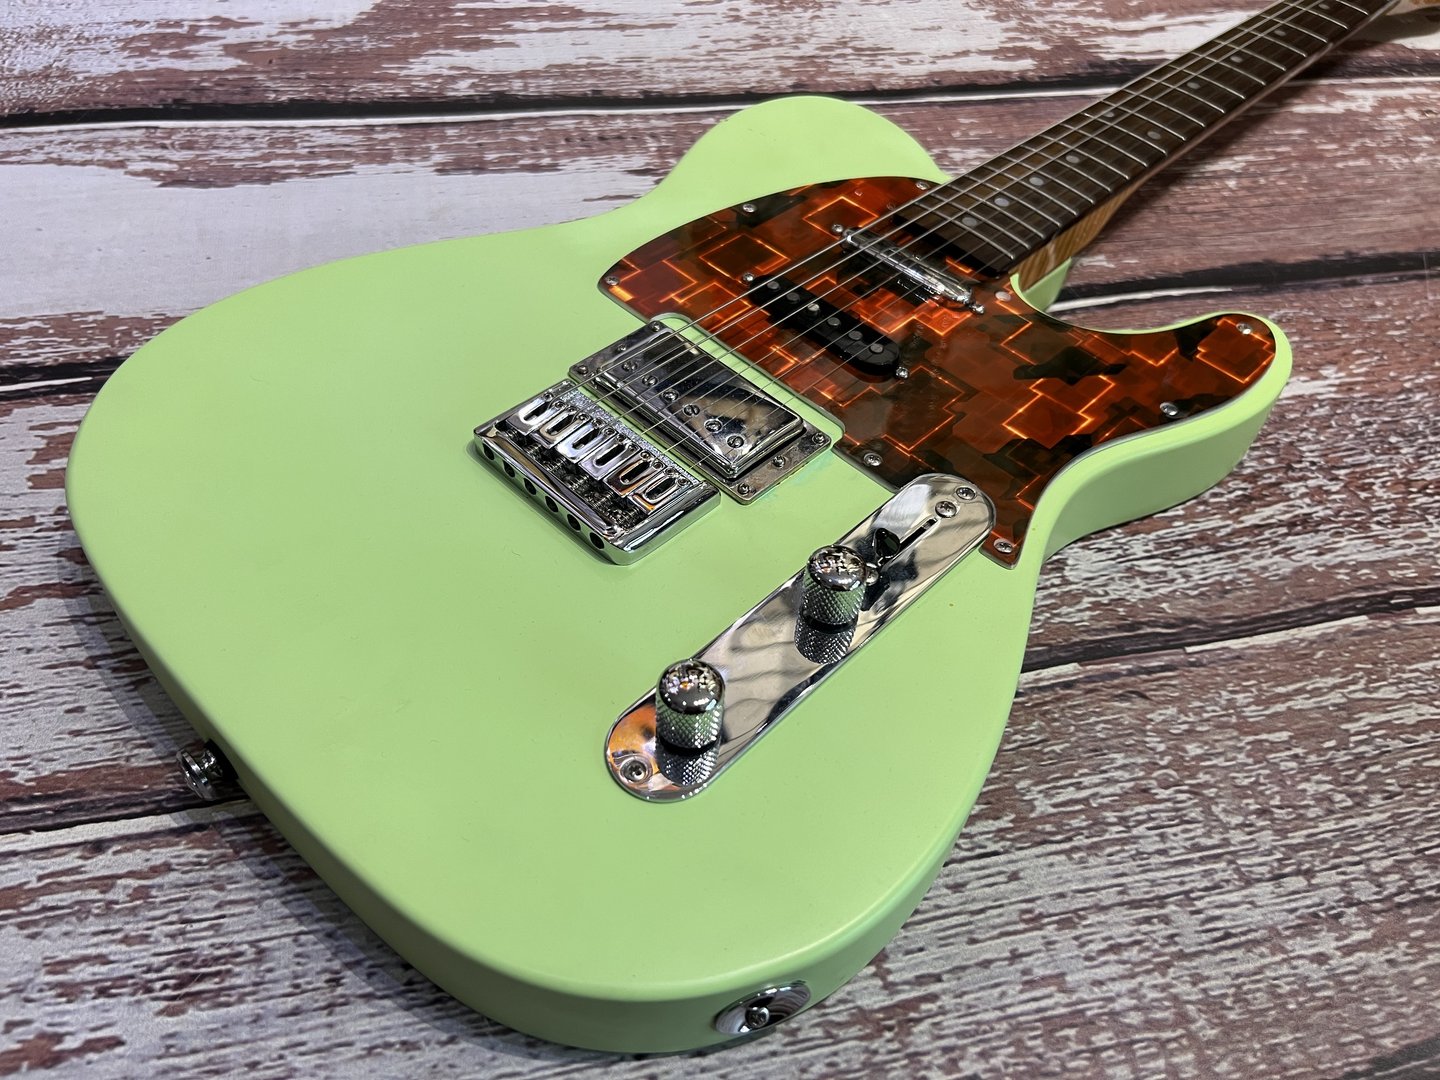 Psyche Surf Green "T"